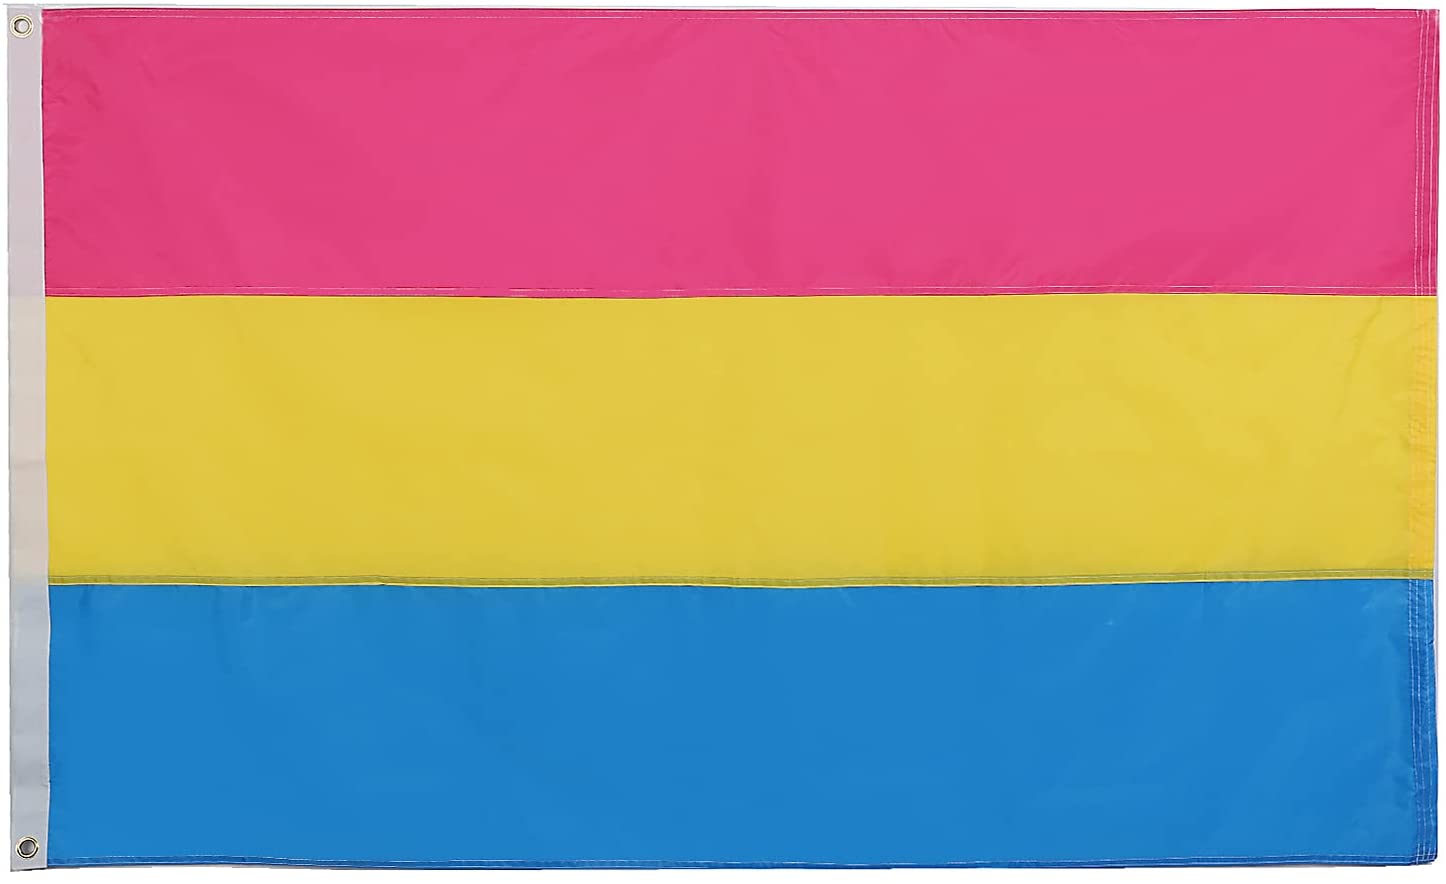 BREEZIUM 210 Nylon Pansexual Pride Flag 3x5 feet- 2 Sided, Sewn Stripes, Double Stitched- Progress Pride Flag- LGBTQ Omnisexual Pride Banner, Non Binary Pansexual Merch- Vibrant Colors, Header Pan Flag